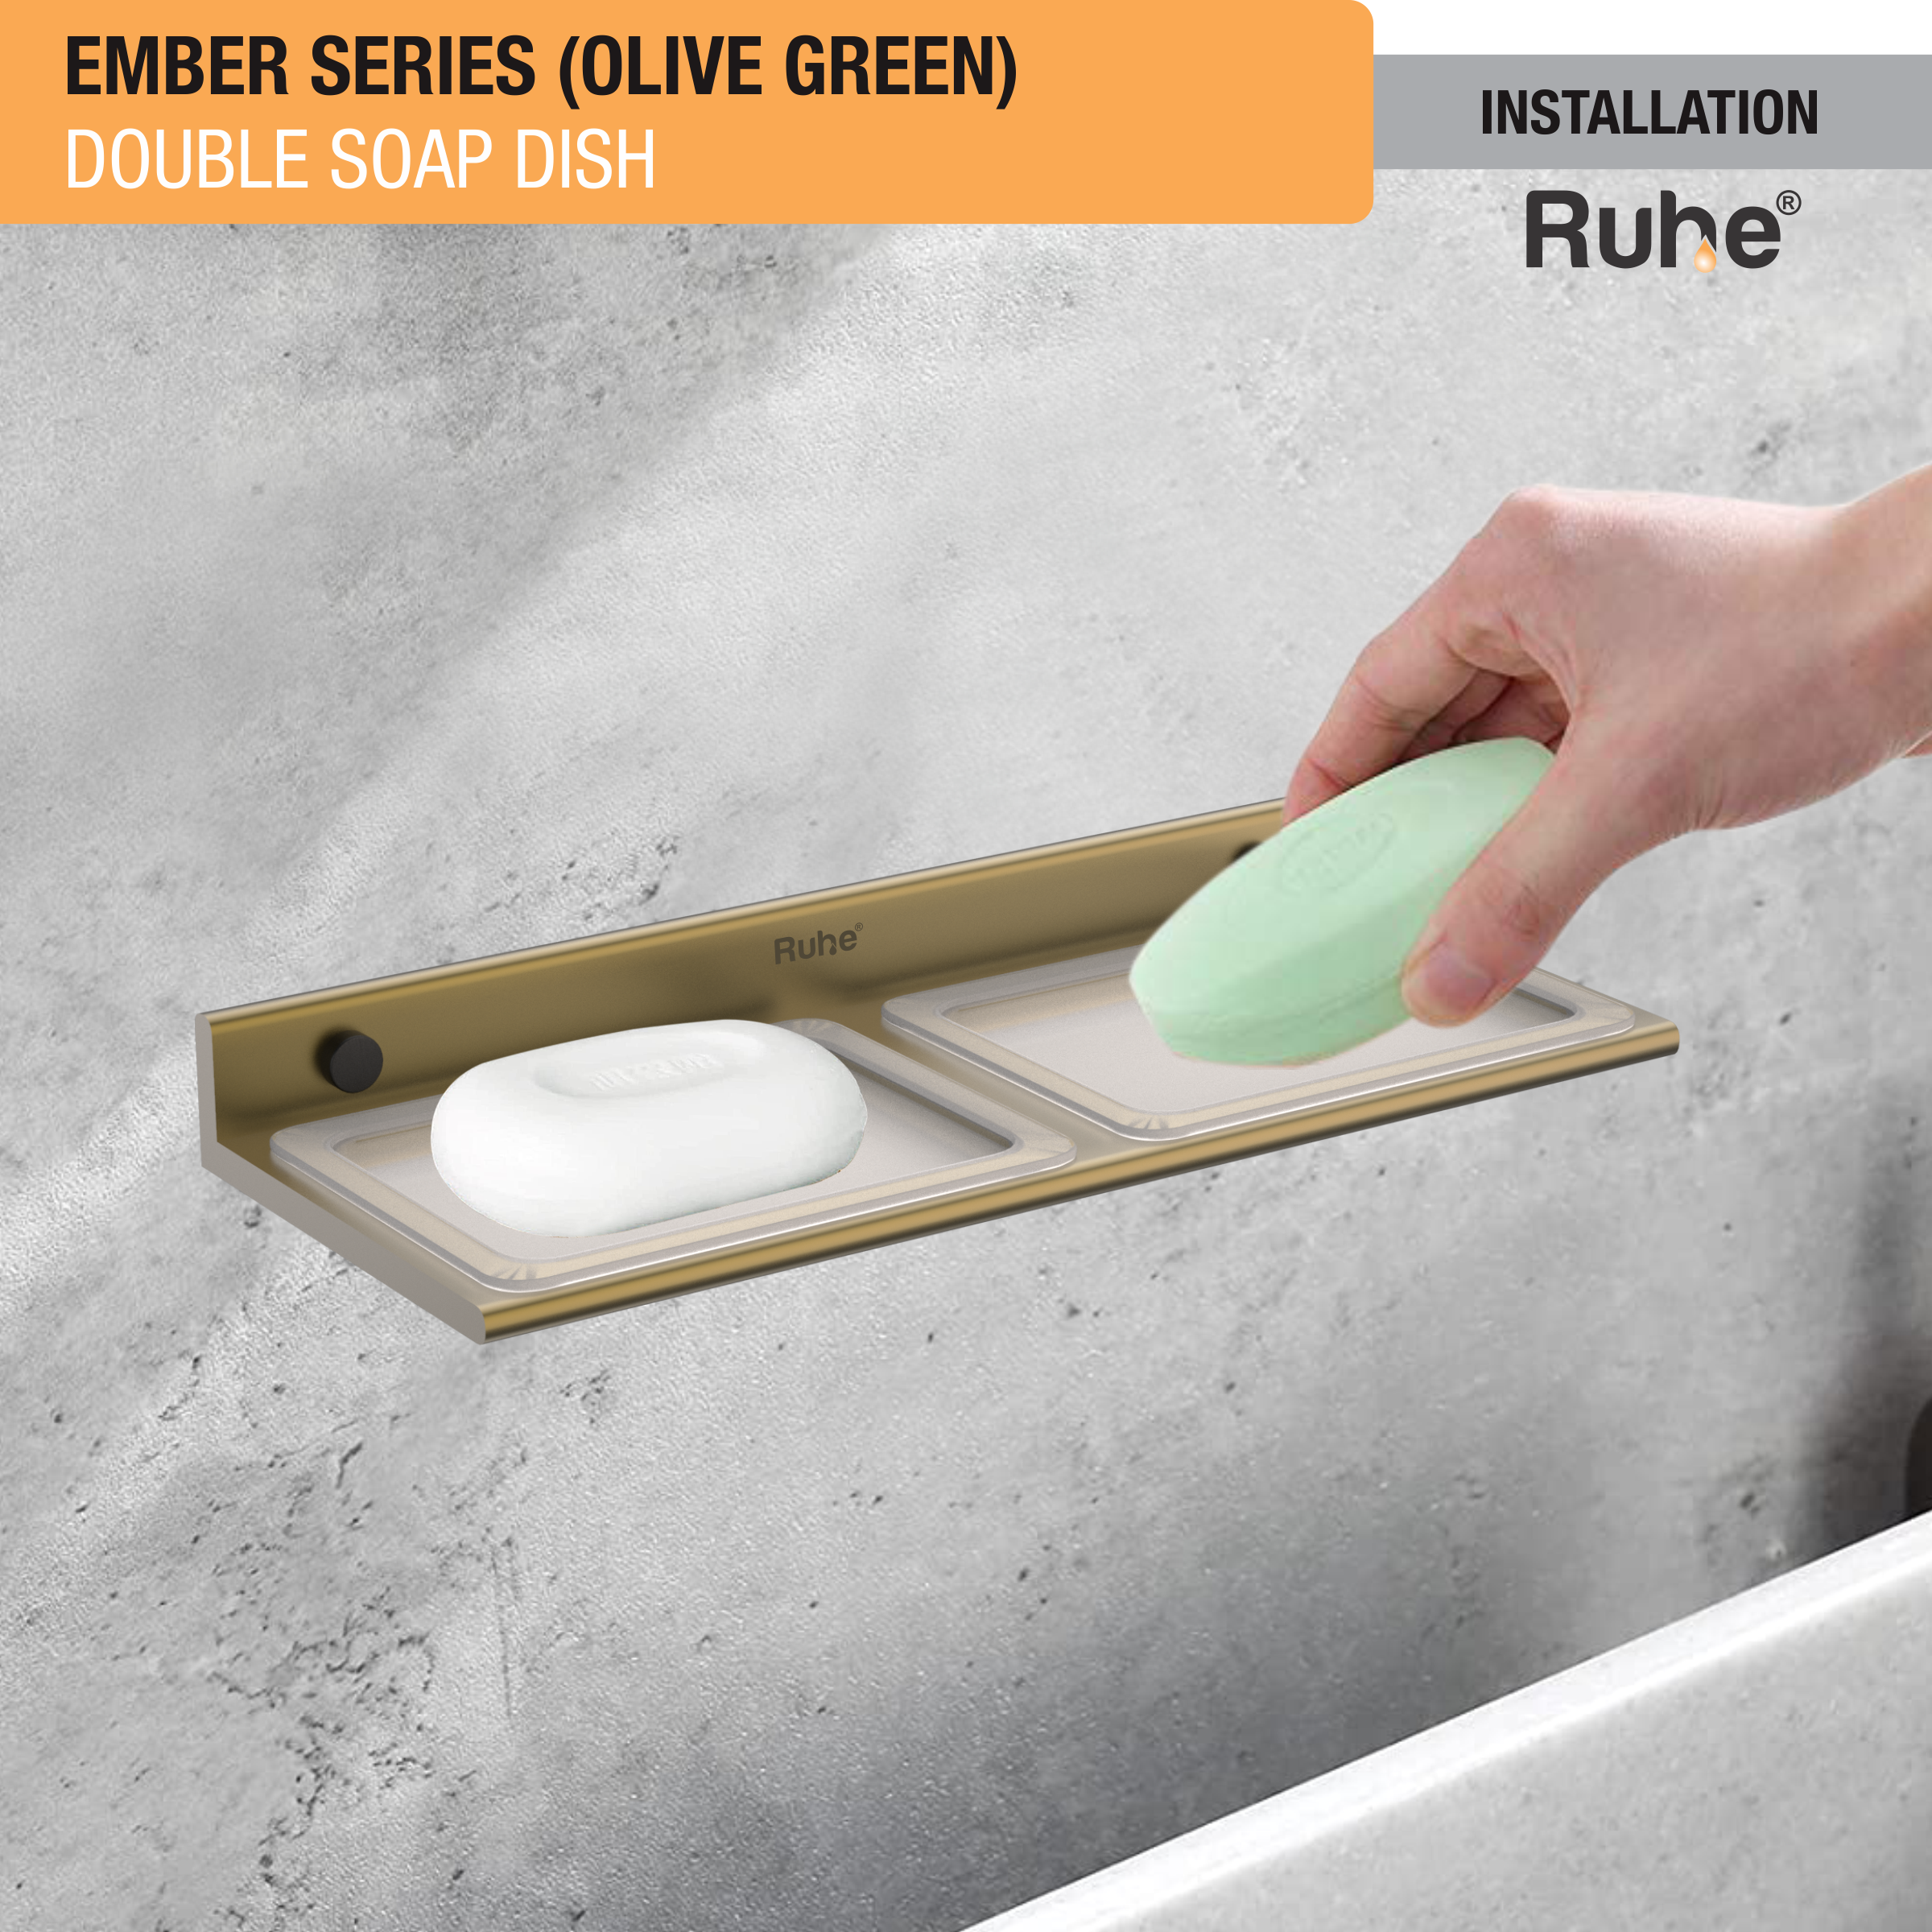 Ember Olive Green Double Soap Dish (Space Aluminium) installation